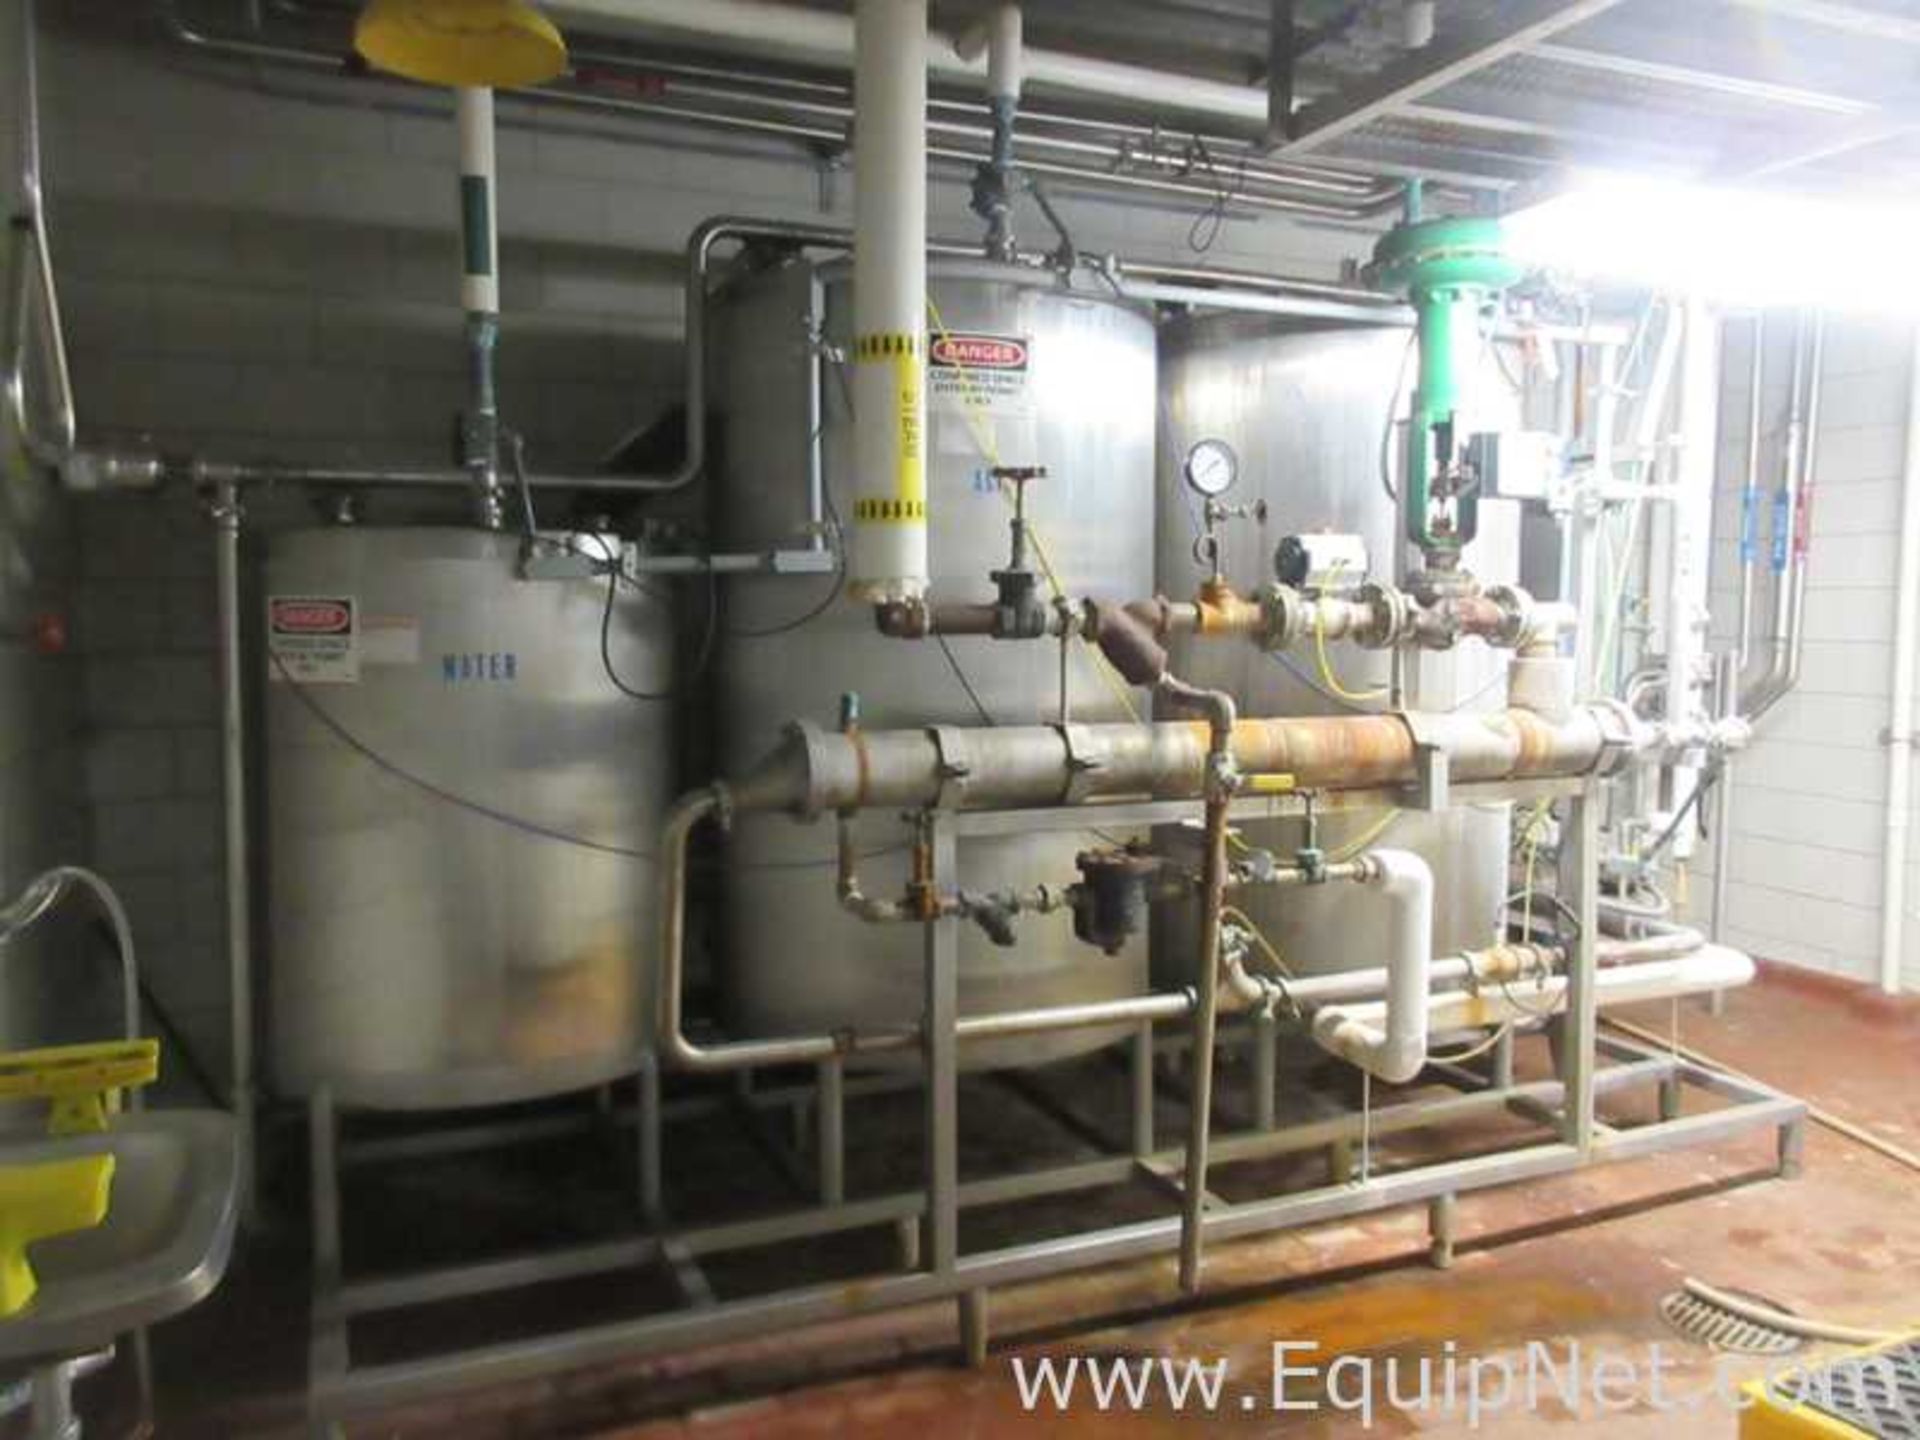 CIP System With Three Tanks, Diaphragm Pumps, Instrumentation And Control Panel